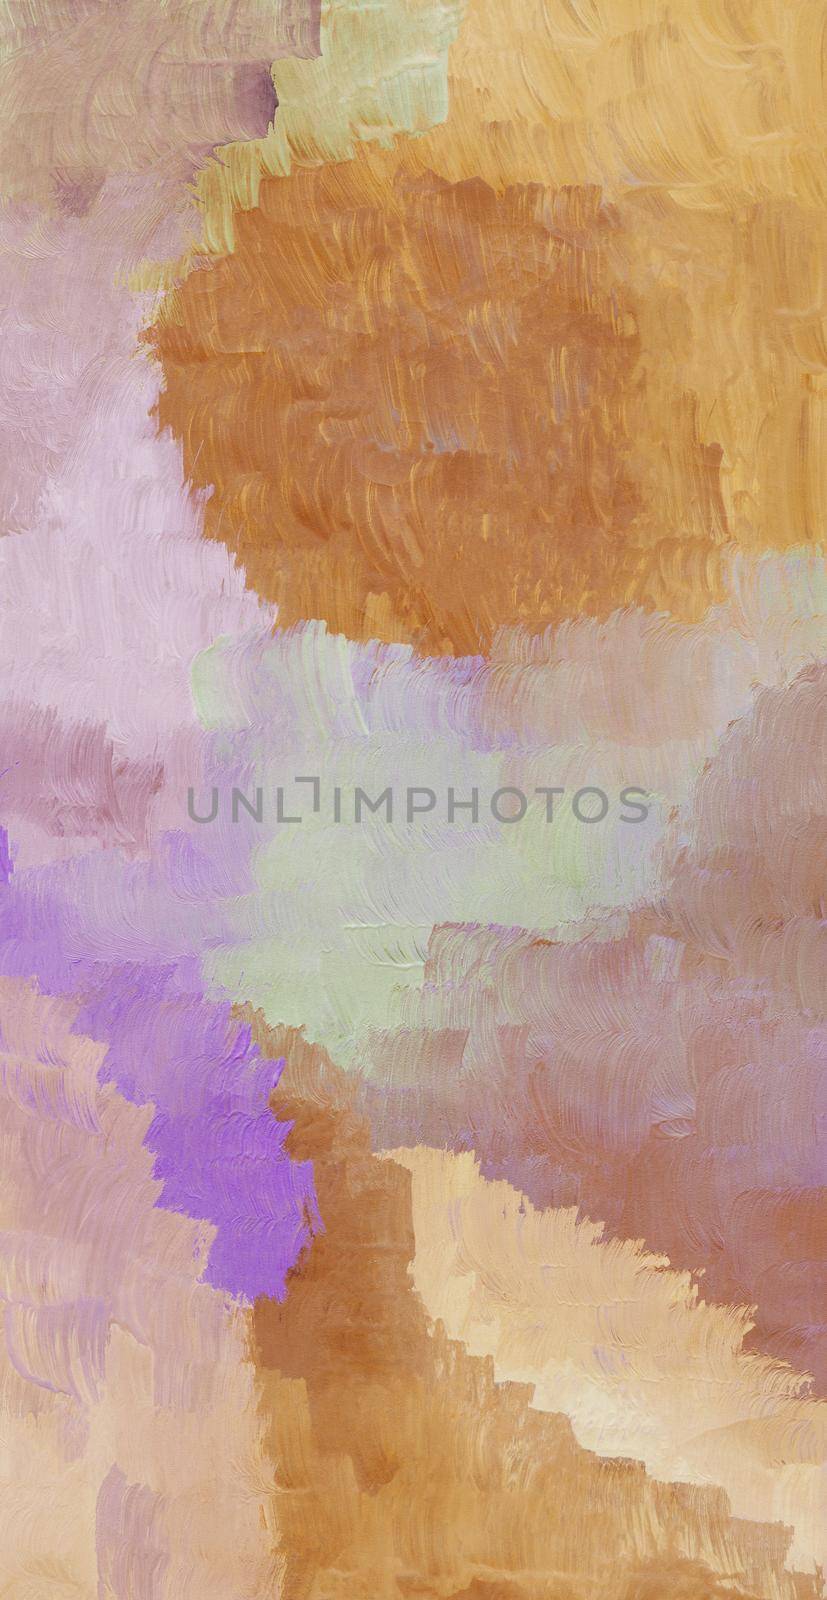 Colored Hand Drawn Gouache Abstract Background. Gouache Paint Decorative Texture Backdrop.